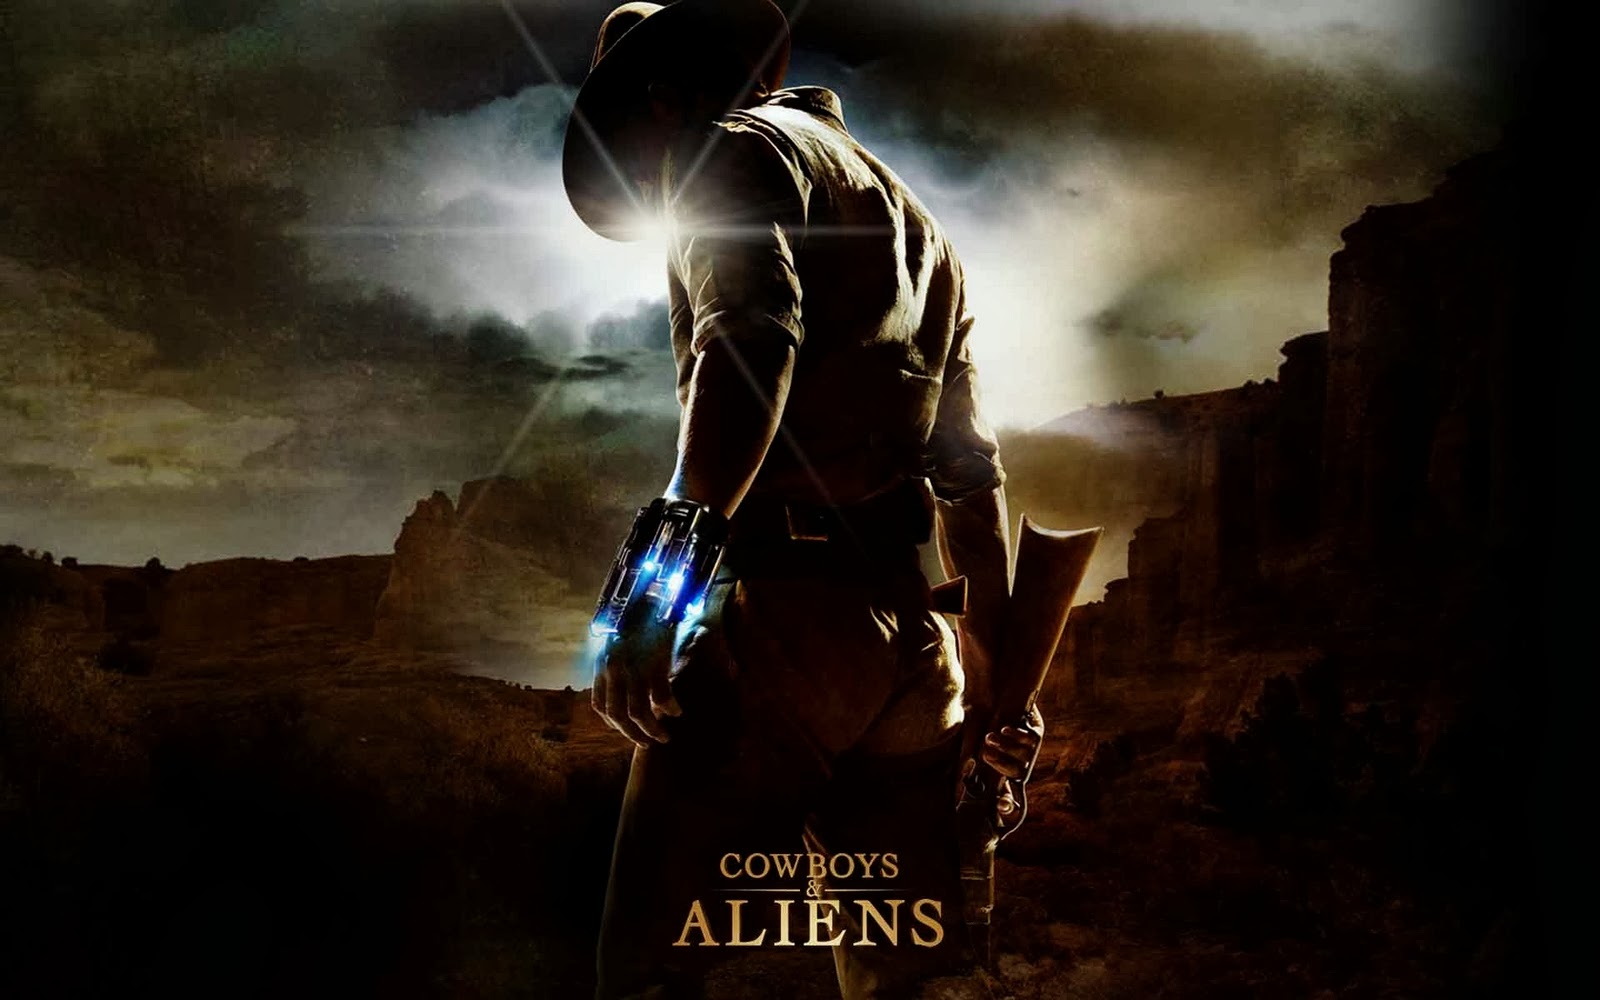 cowboys and aliens game